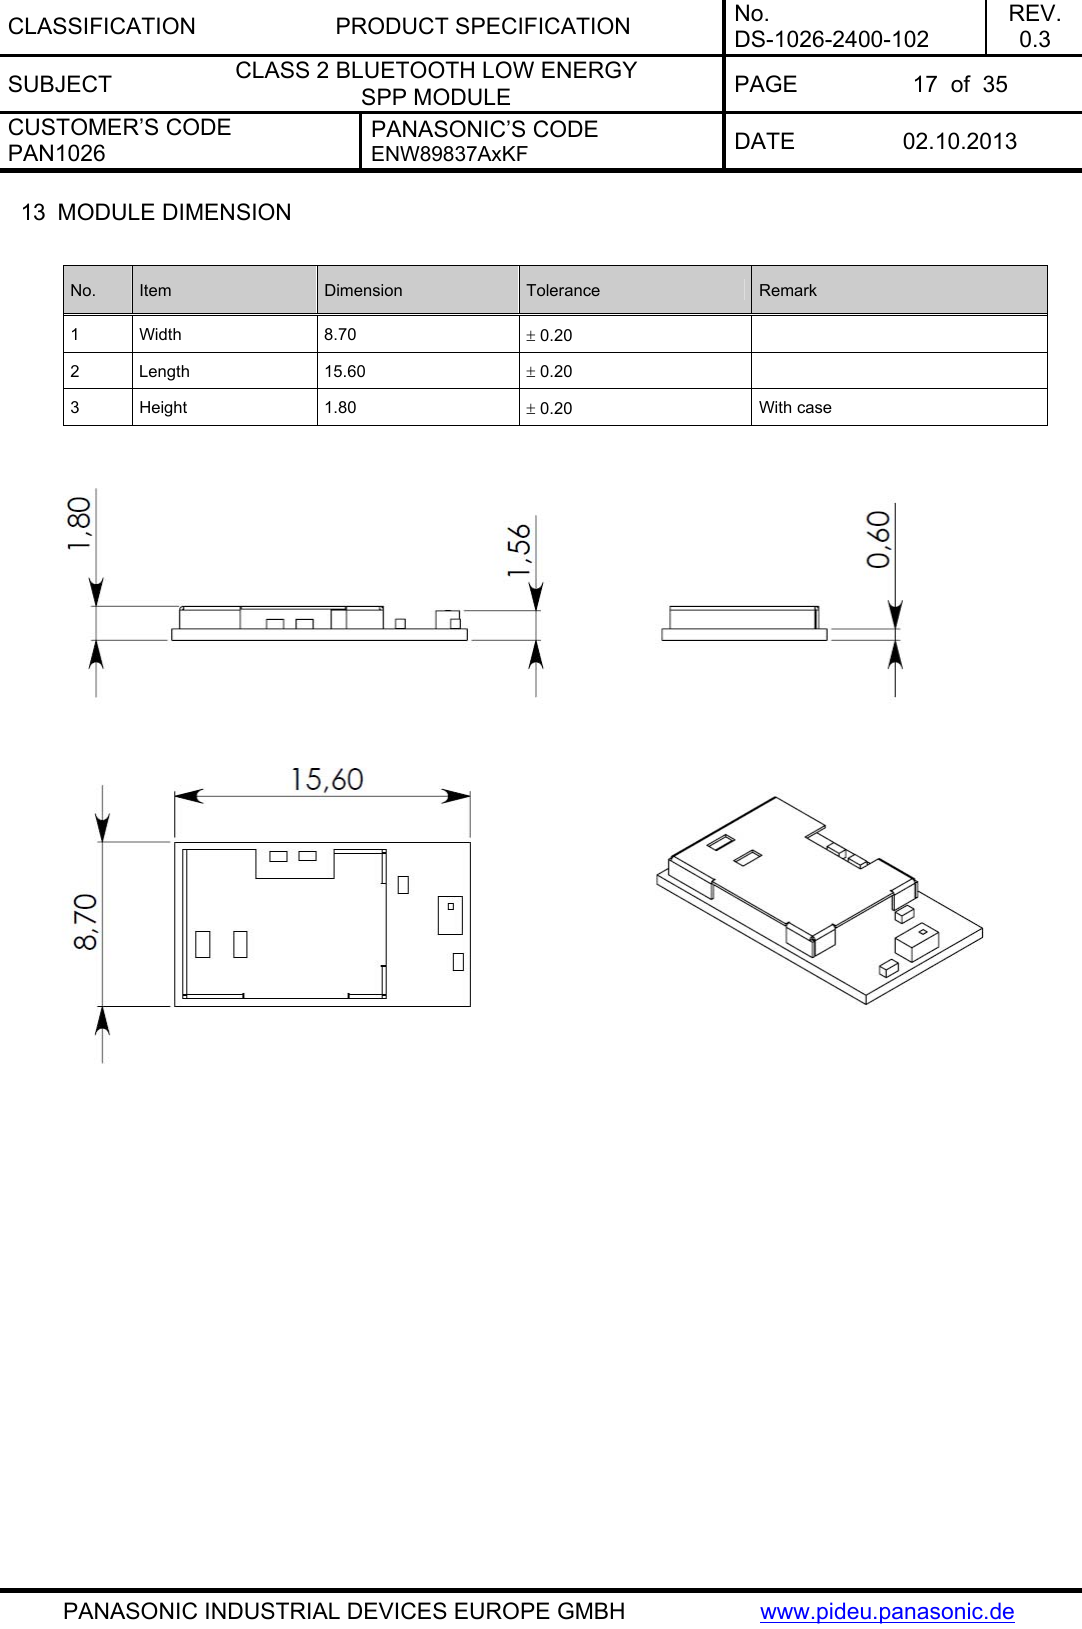 CLASSIFICATION PRODUCT SPECIFICATION No. DS-1026-2400-102 REV. 0.3 SUBJECT  CLASS 2 BLUETOOTH LOW ENERGY  SPP MODULE  PAGE  17  of  35 CUSTOMER’S CODE PAN1026 PANASONIC’S CODE ENW89837AxKF  DATE 02.10.2013   PANASONIC INDUSTRIAL DEVICES EUROPE GMBH  www.pideu.panasonic.de 13  MODULE DIMENSION  No.  Item  Dimension  Tolerance  Remark 1 Width  8.70   0.20   2 Length  15.60   0.20   3 Height  1.80   0.20  With case     